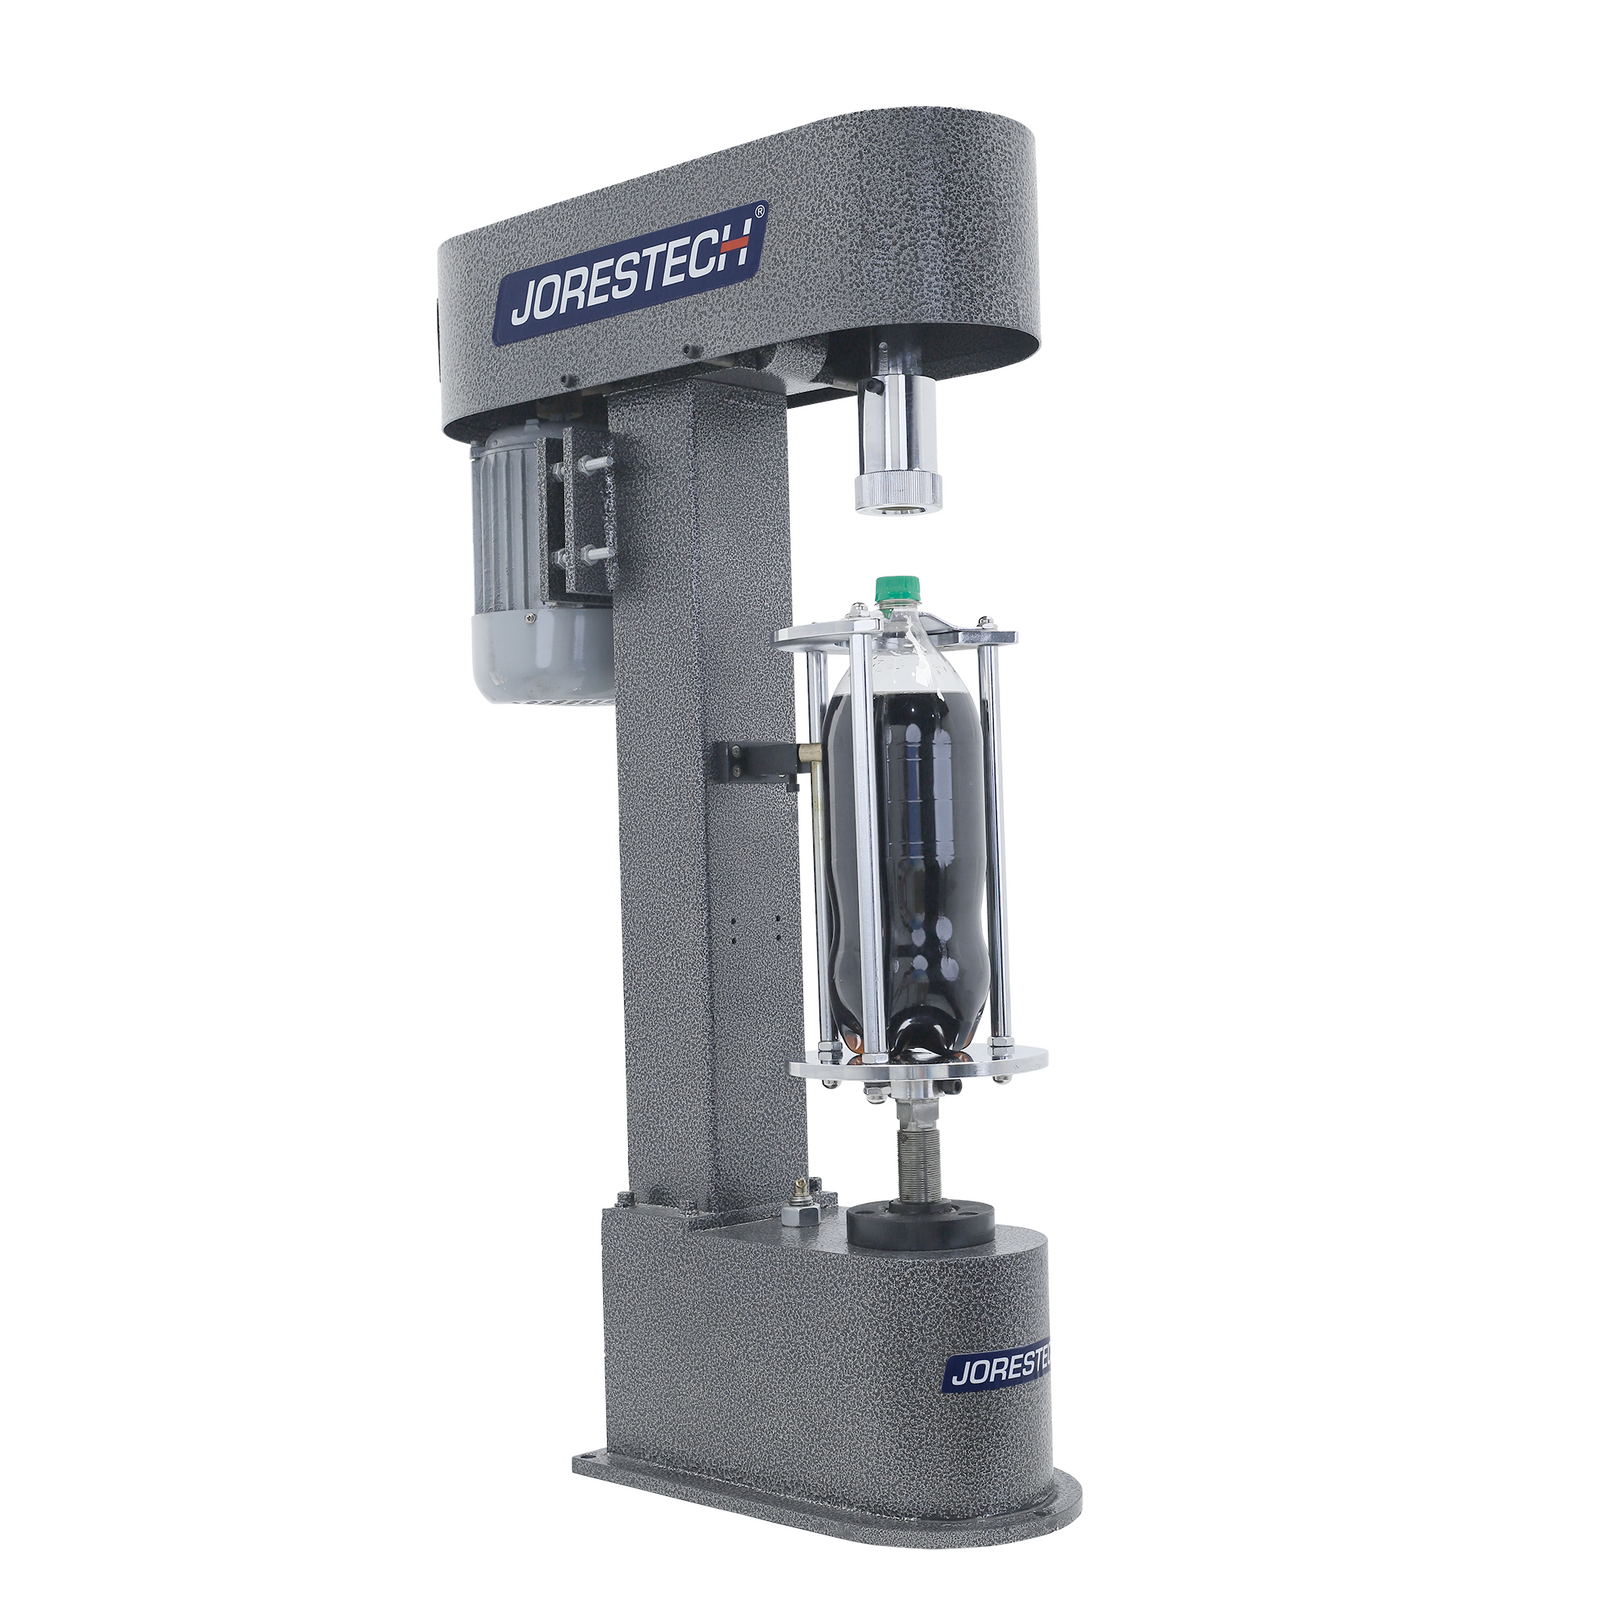 The bottle capper with Jorestech logo on side. The machine has a plastic bottle filled with dark liquid and has a plastic green cap closing the bottle.